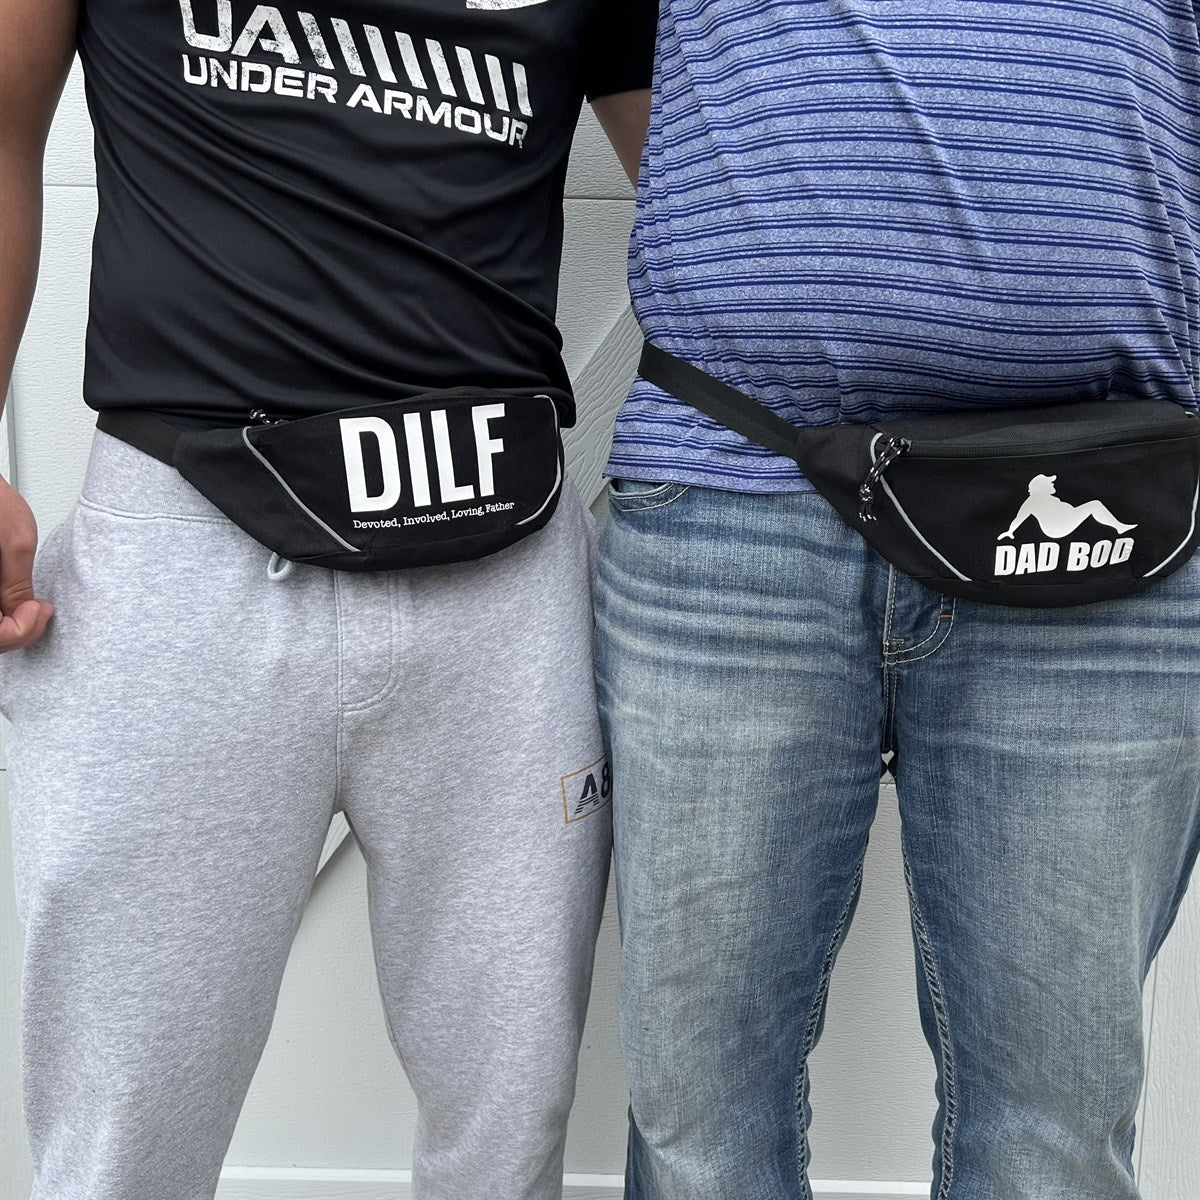 DILF (Devoted Involved Loving Father) Fanny Pack